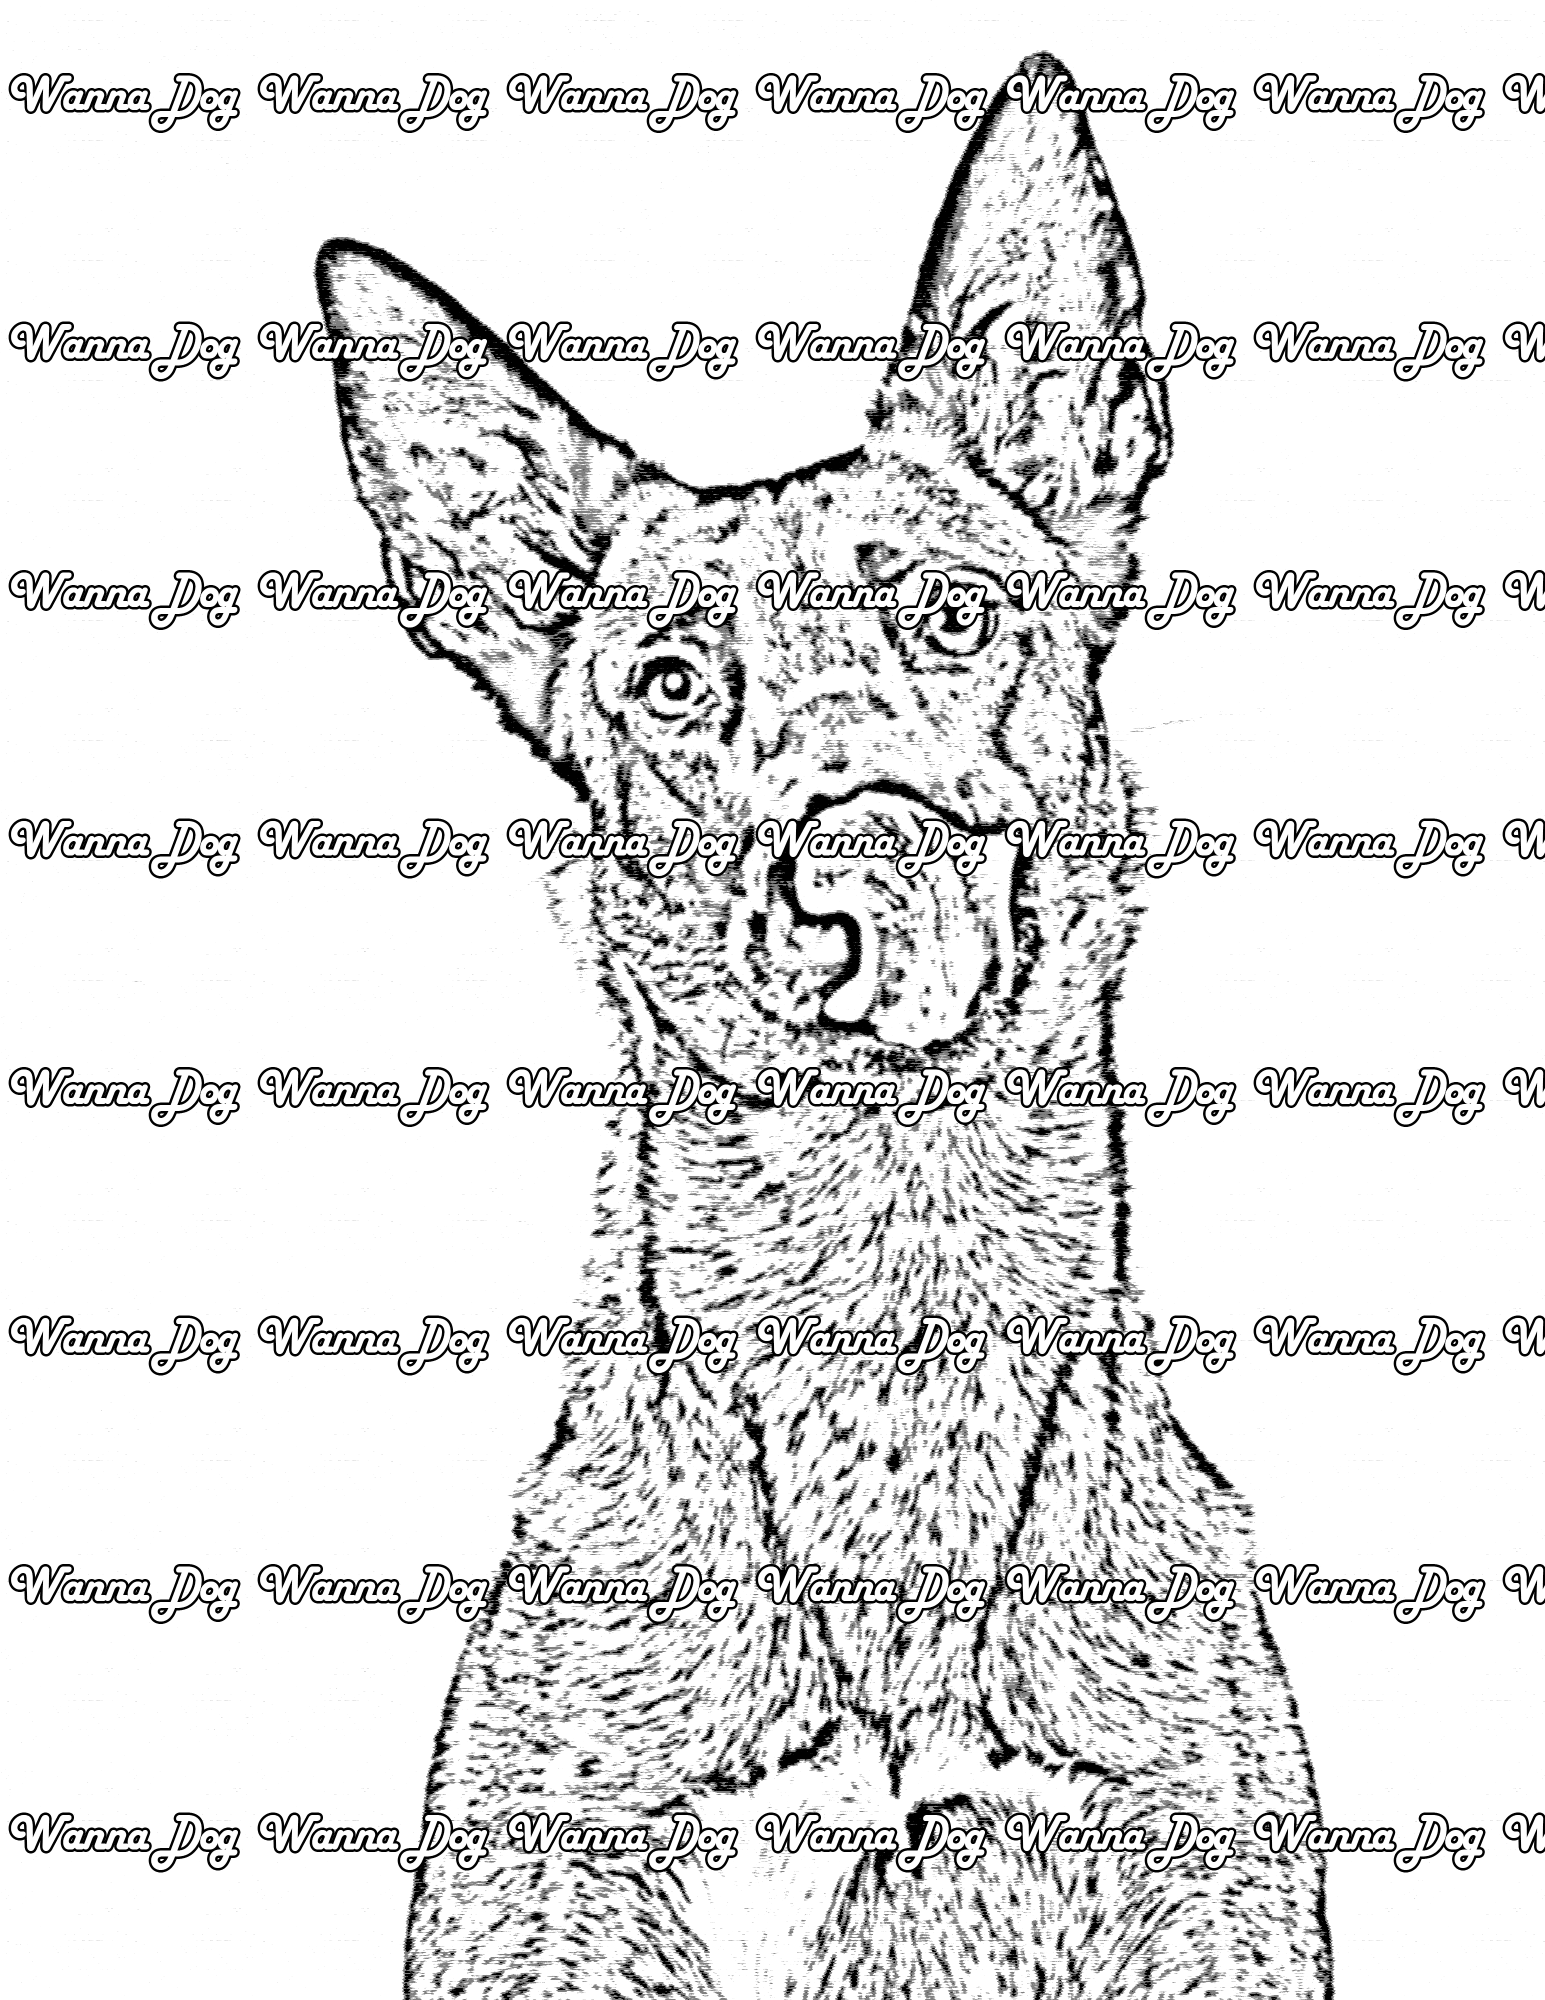 Belgian Malinois Coloring Page of a Belgian Malinois close up and licking their nose